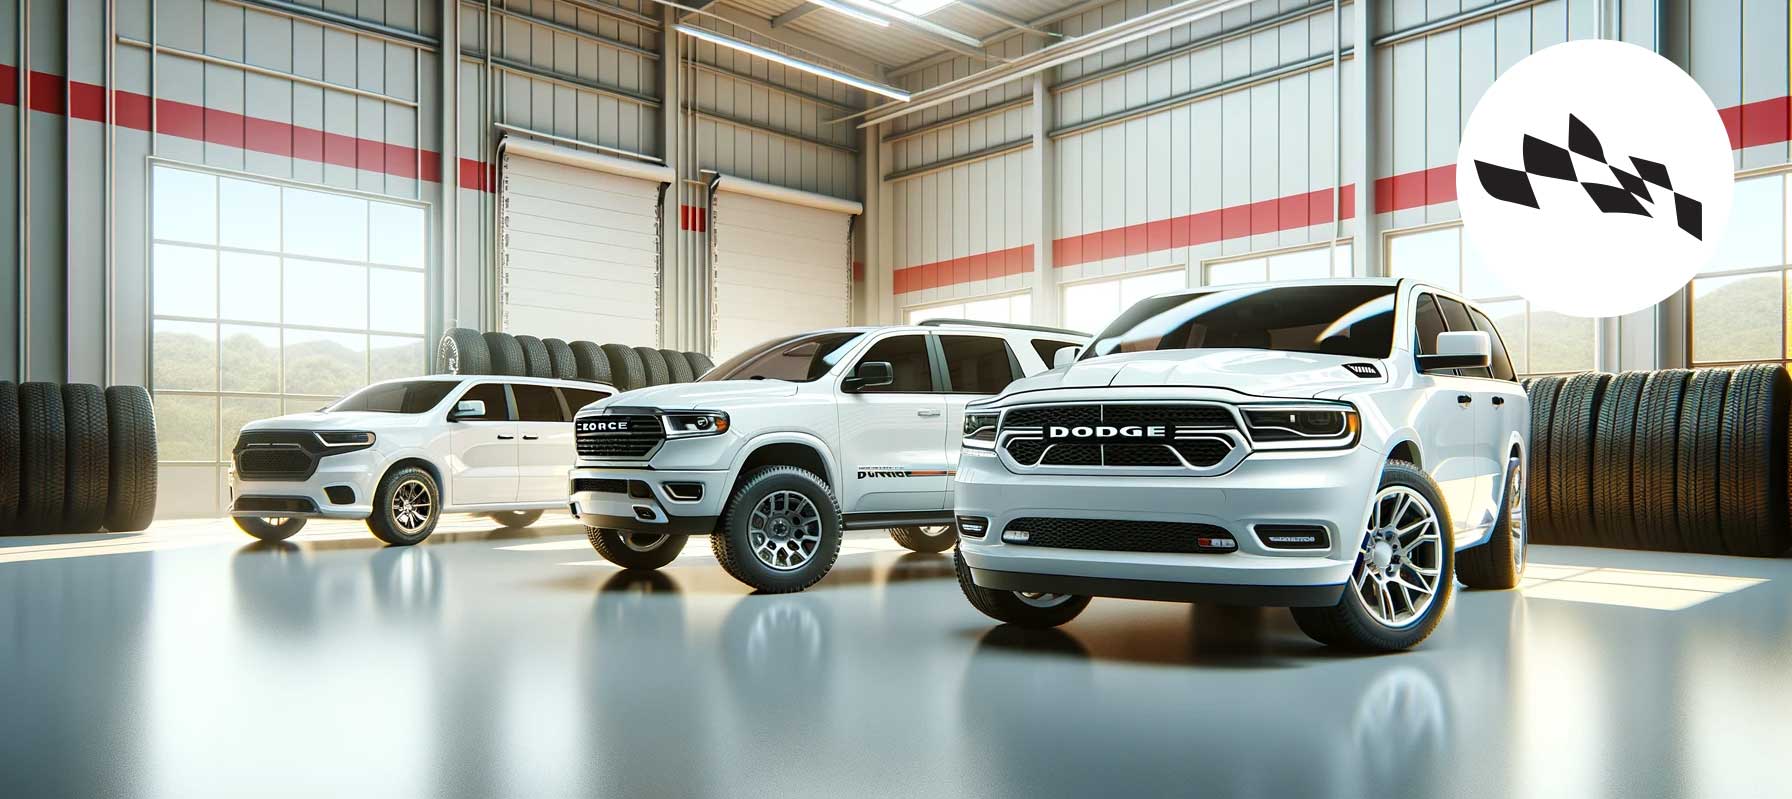 Dodge truck and SUVs tire warehouse image